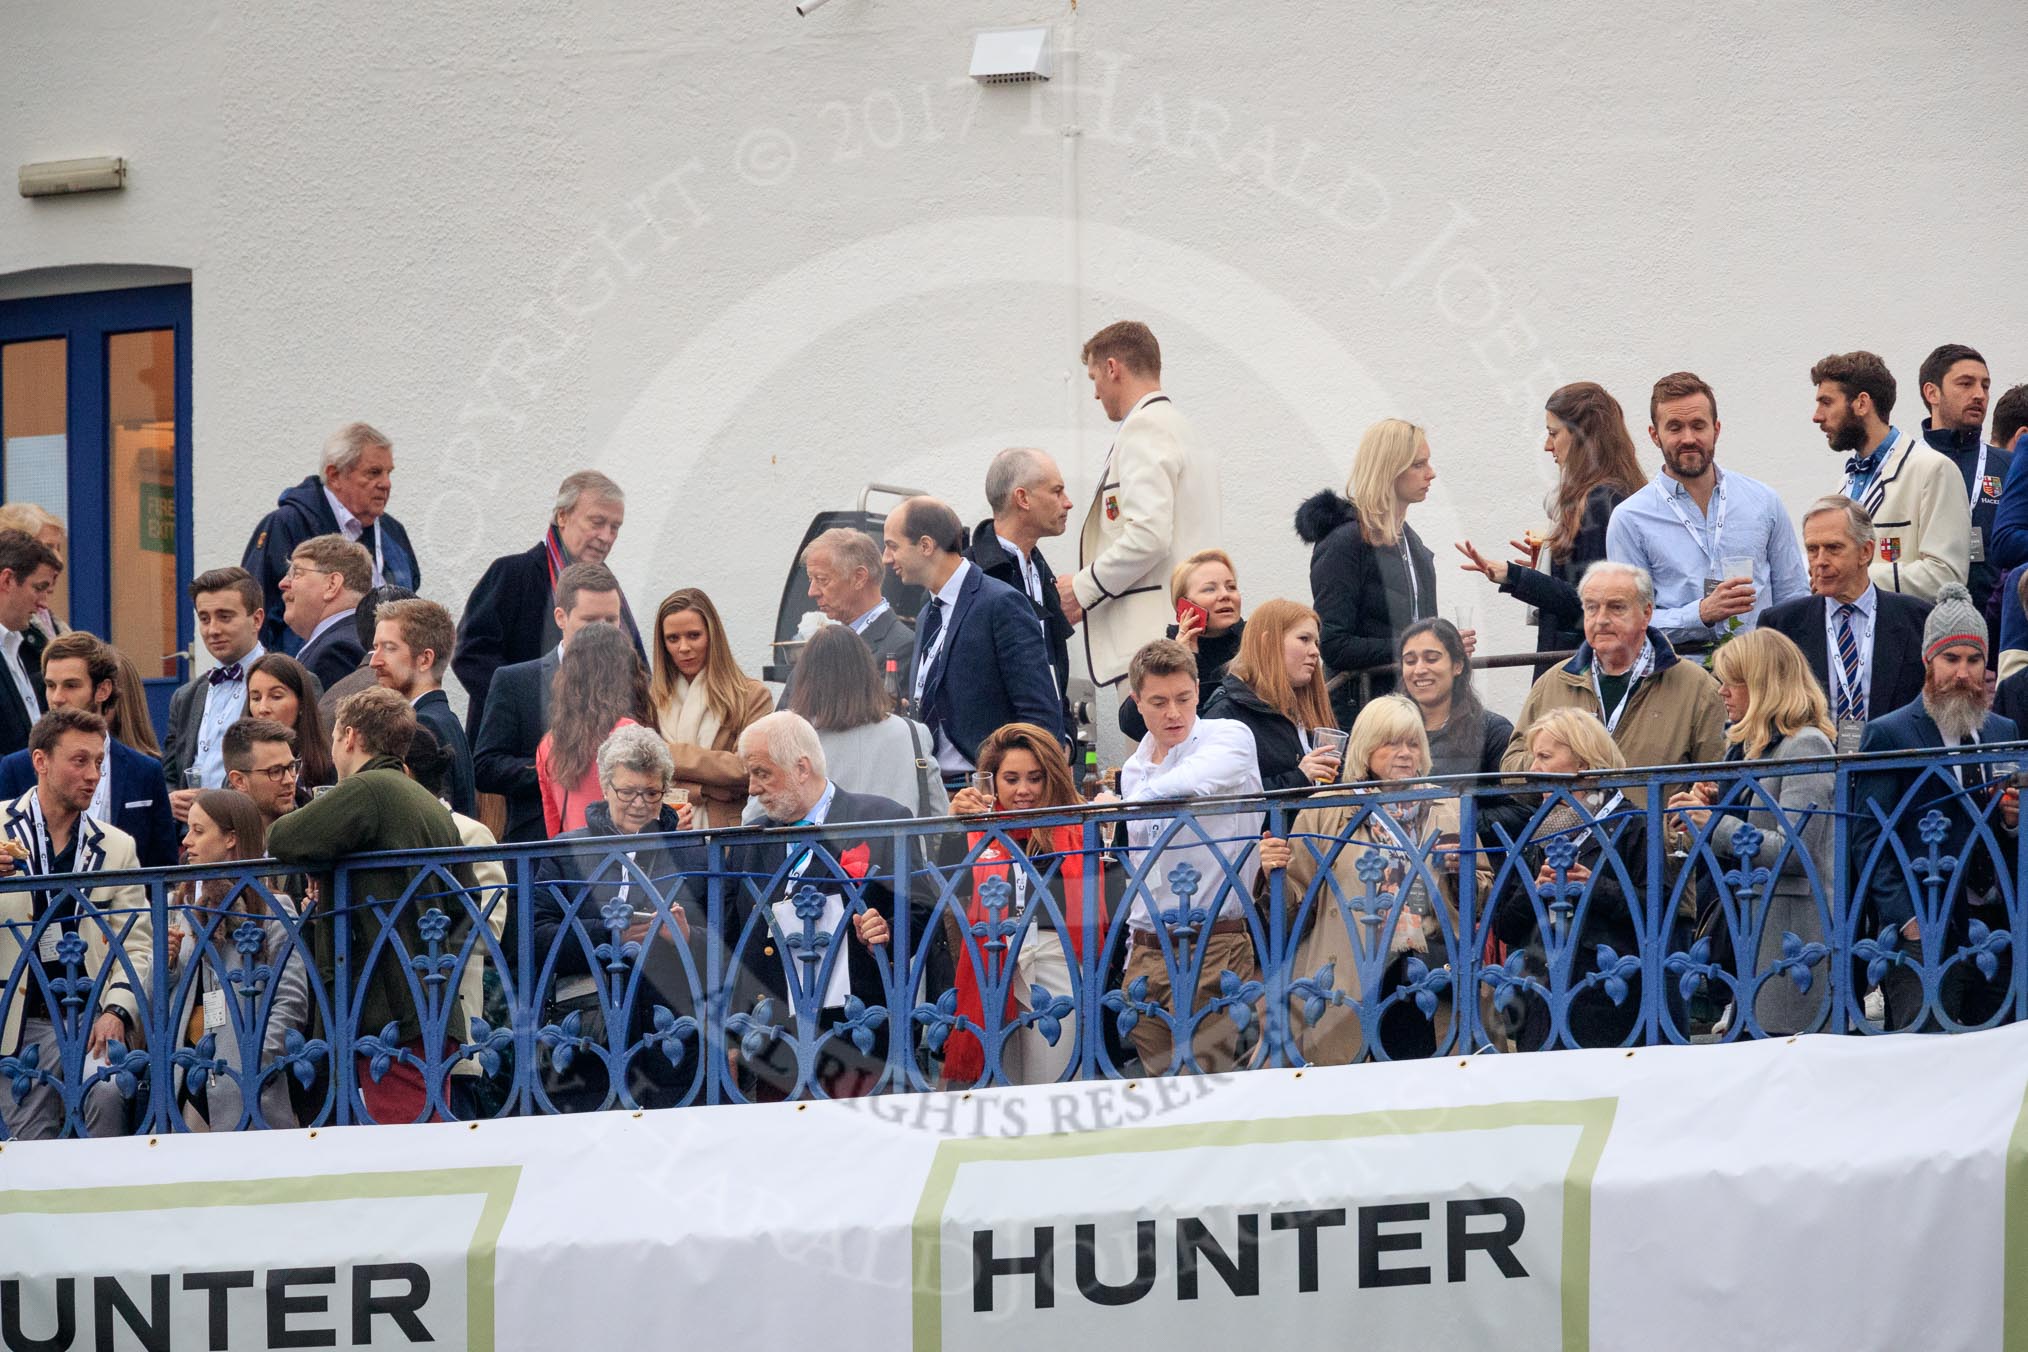 The Cancer Research UK Women's Boat Race 2018: The balconies of the many Putney Embankment boathouses are, as usual, crowded with spectators on race day.
River Thames between Putney Bridge and Mortlake,
London SW15,

United Kingdom,
on 24 March 2018 at 16:12, image #142